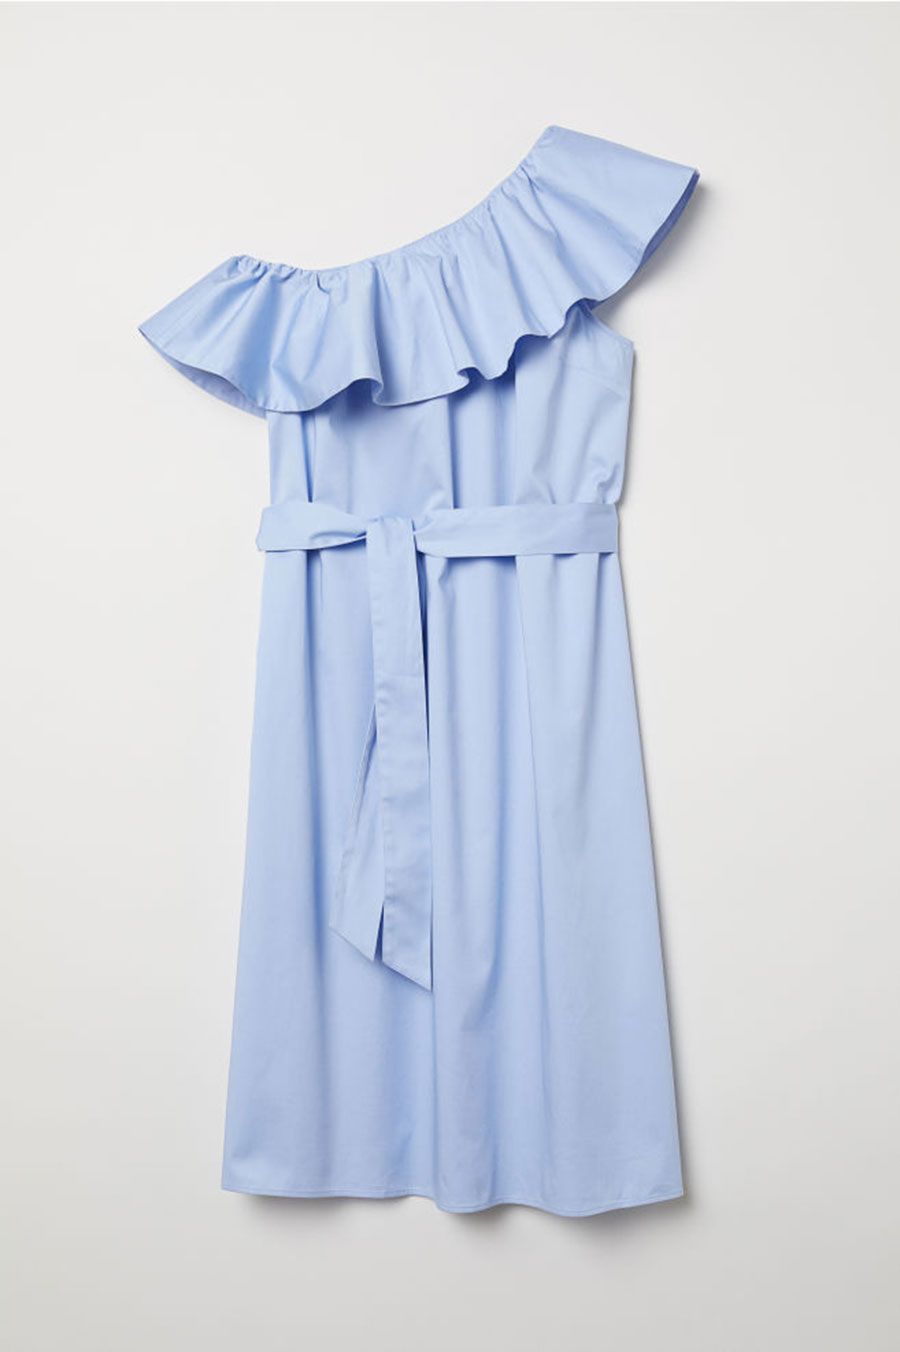 Blue, Clothing, White, Product, Dress, Ruffle, Sleeve, Textile, Day dress, One-piece garment, 